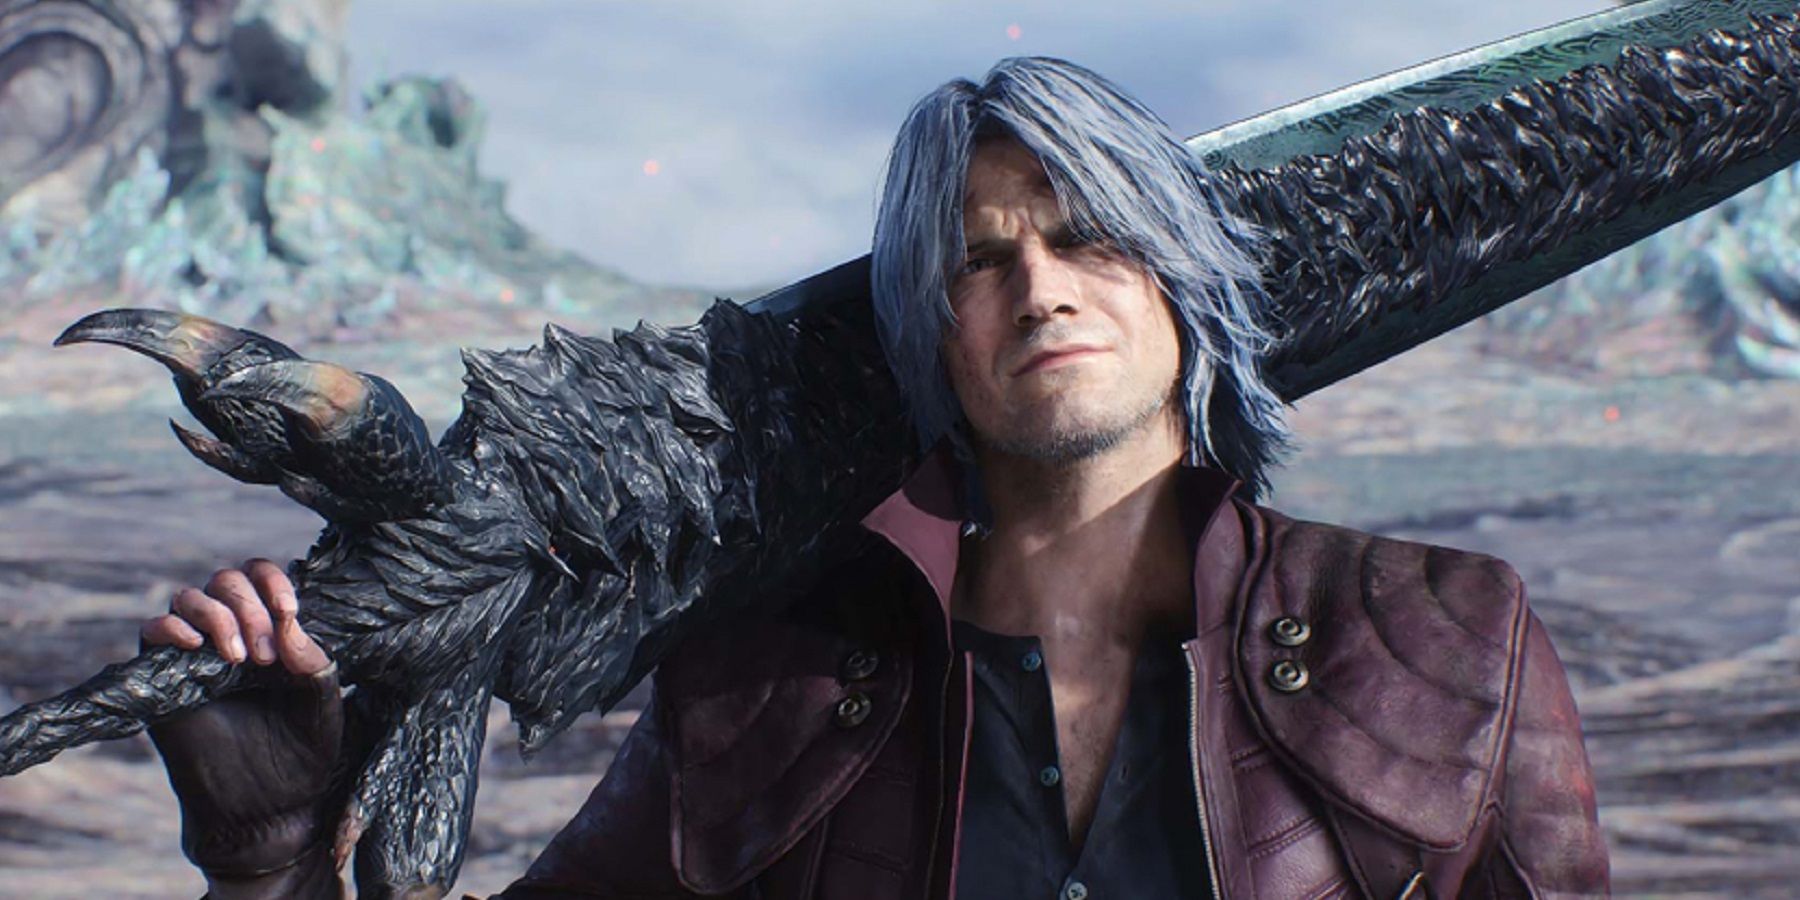 Devil May Cry 5 Dante stares at the viewer with a sword slung over his shoulder.